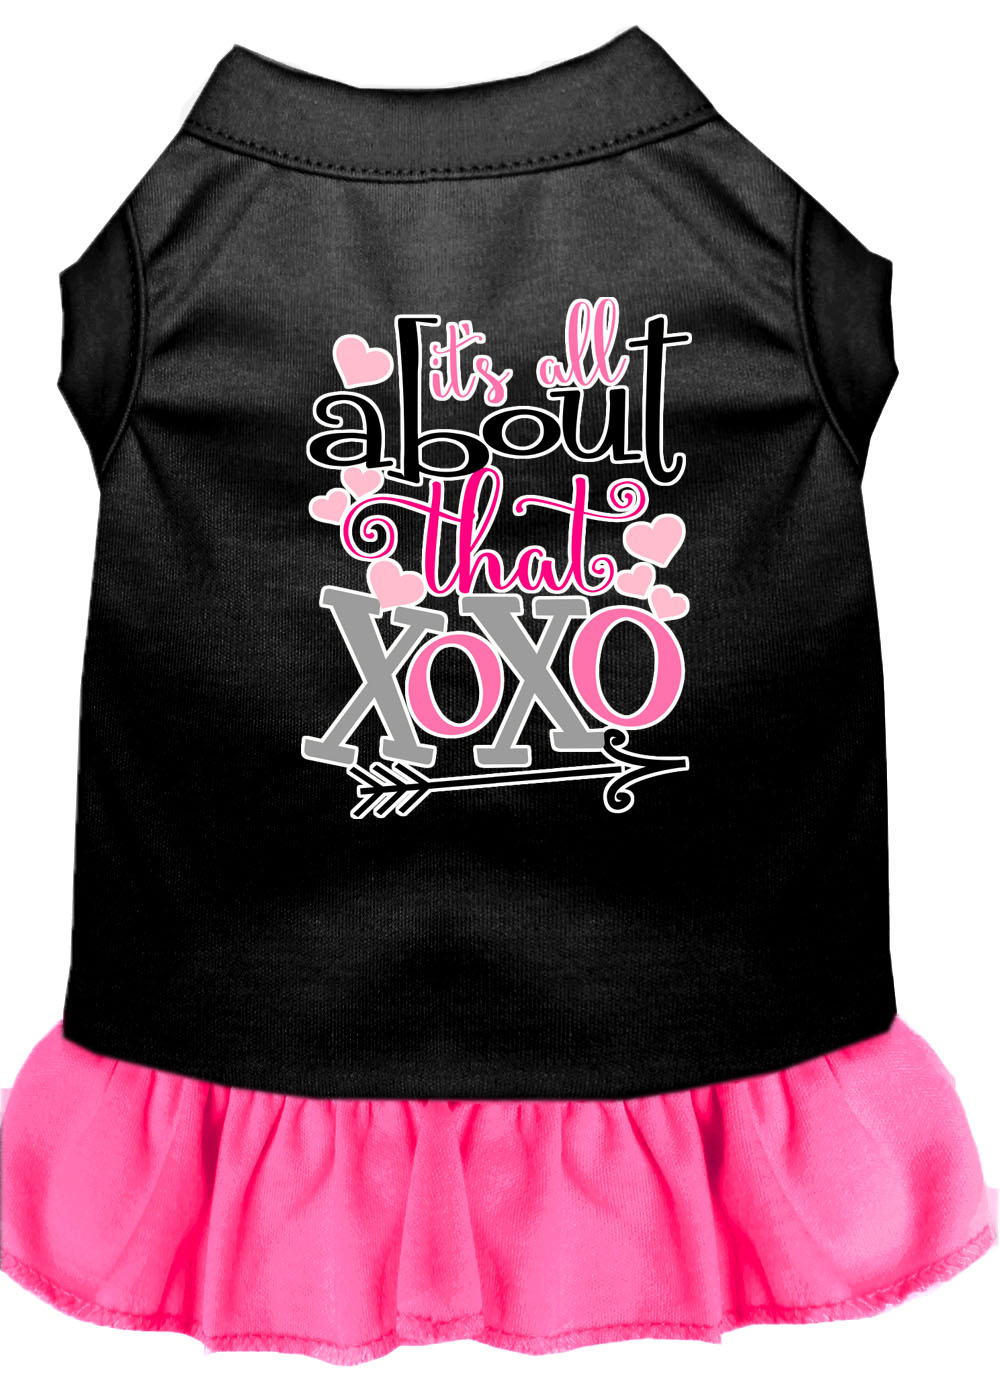 All about the XOXO Screen Print Dog Dress Black with Bright Pink Lg